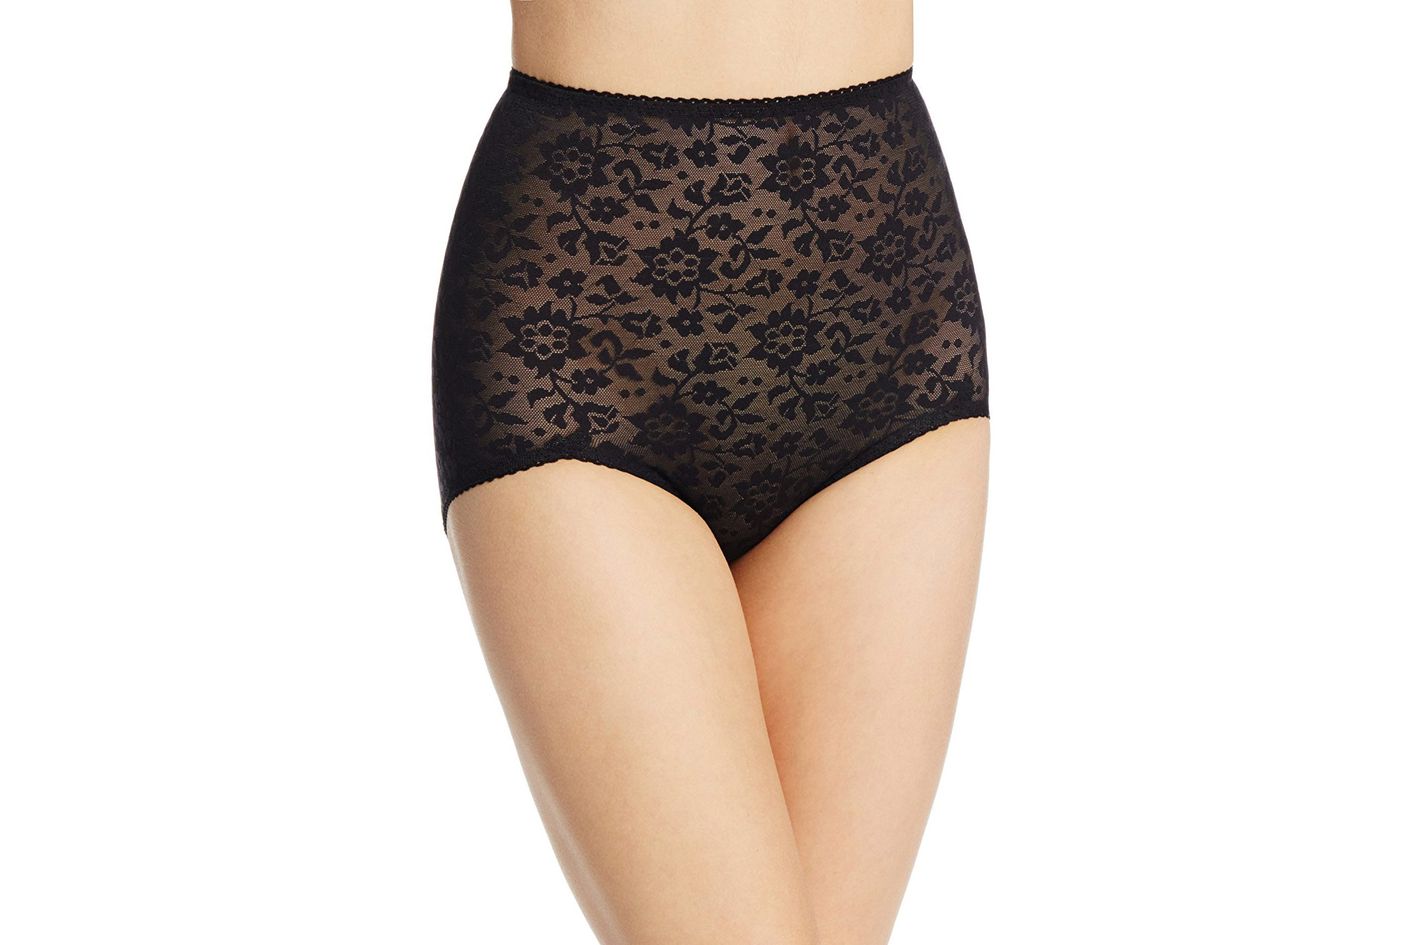 2x Shaping Firm Control Brief Knickers High-Waisted Slimming